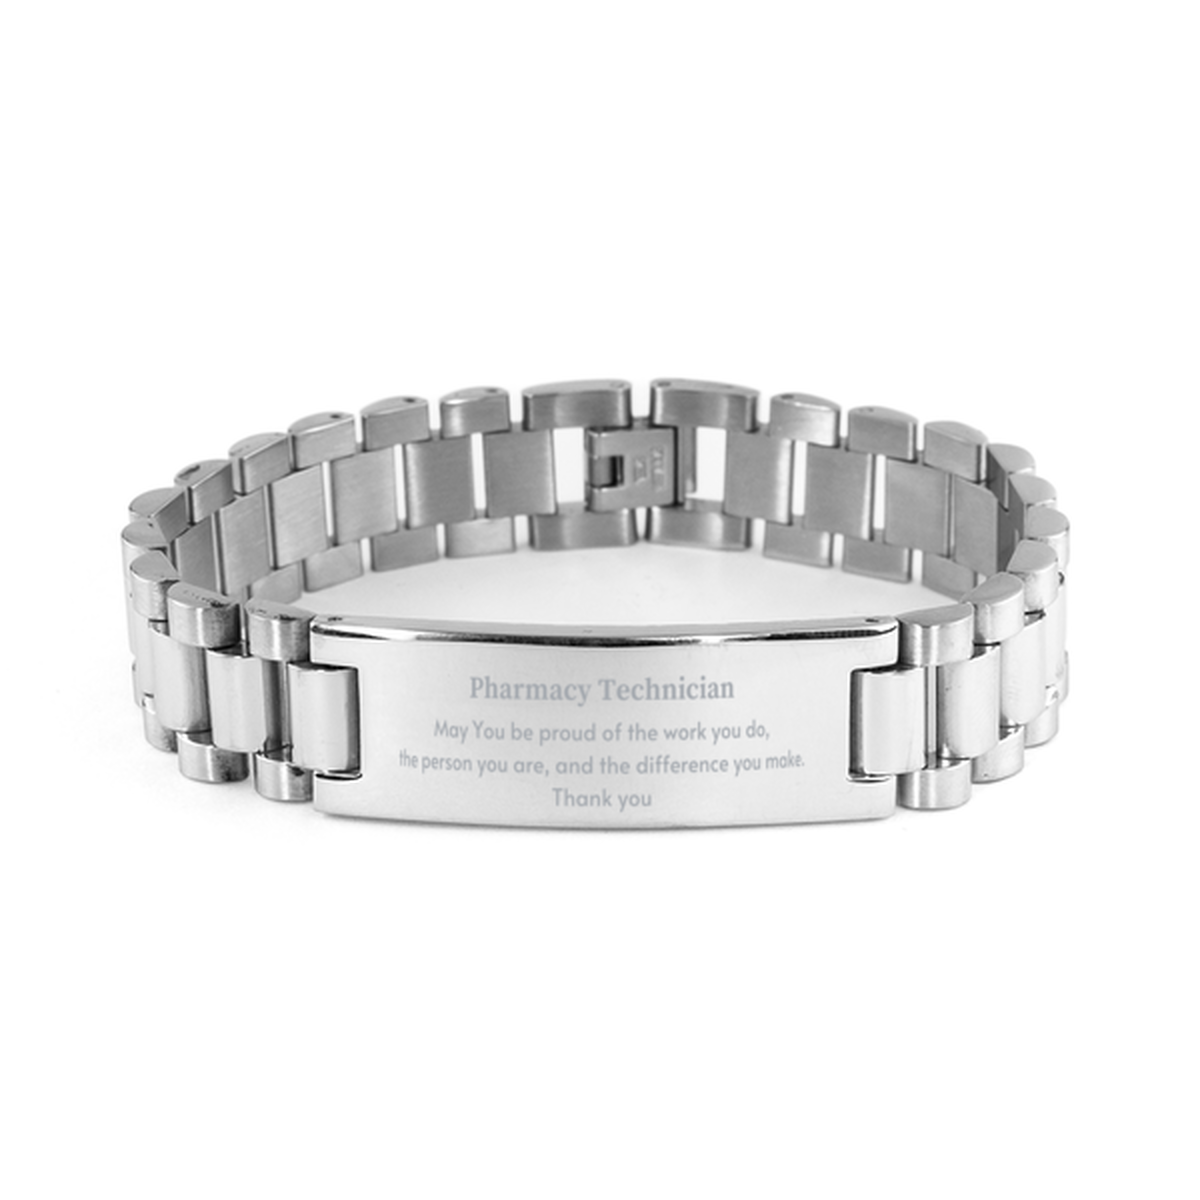 Heartwarming Ladder Stainless Steel Bracelet Retirement Coworkers Gifts for Pharmacy Technician, Pharmacy Technician May You be proud of the work you do, the person you are Gifts for Boss Men Women Friends